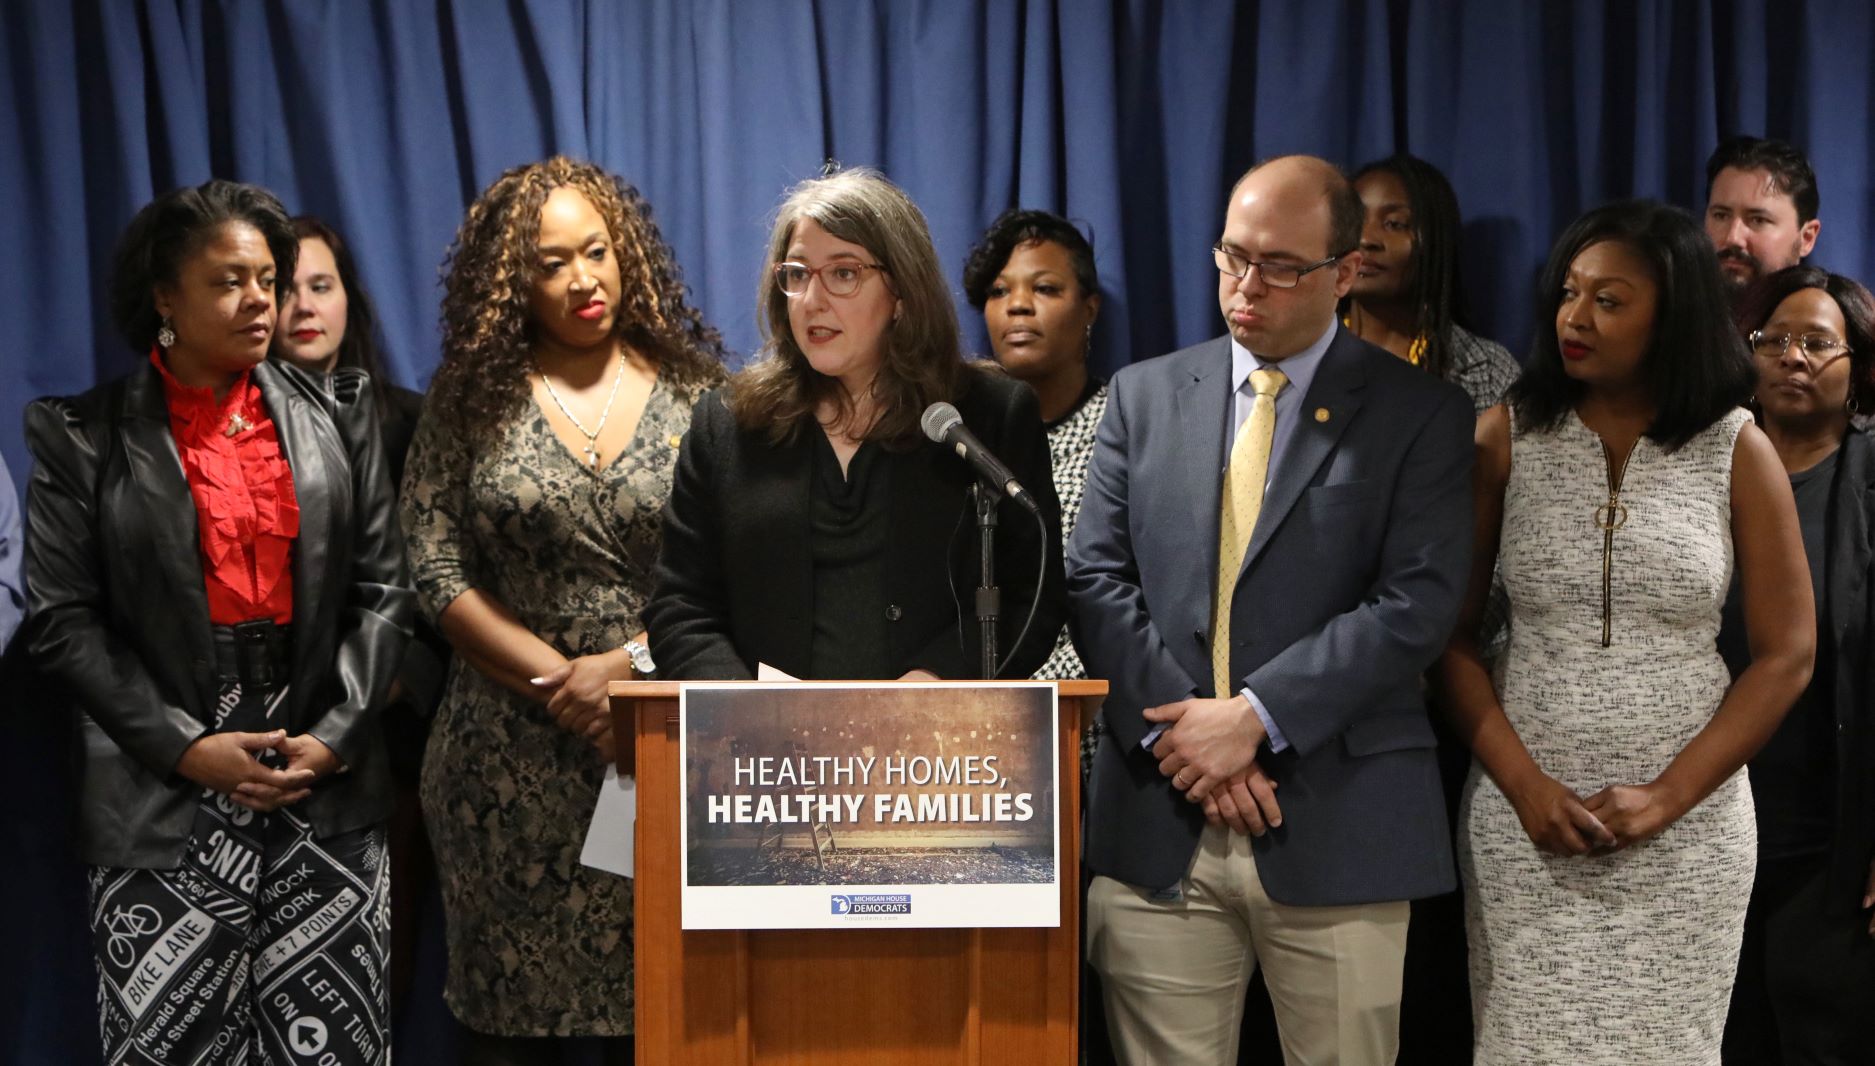 State Reps. Rachel Hood (D-Grand Rapids), Leslie Love (D-Detroit), Sherry Gay-Dagnogo (D-Detroit), John Cherry (D-Flint) and Sarah Anthony (D-Lansing) unveiling the comprehensive Healthy Homes, Healthy Families package to eliminate the threat of lead exposure in and around the home at a press conference in Lansing on Feb. 4, 2020.